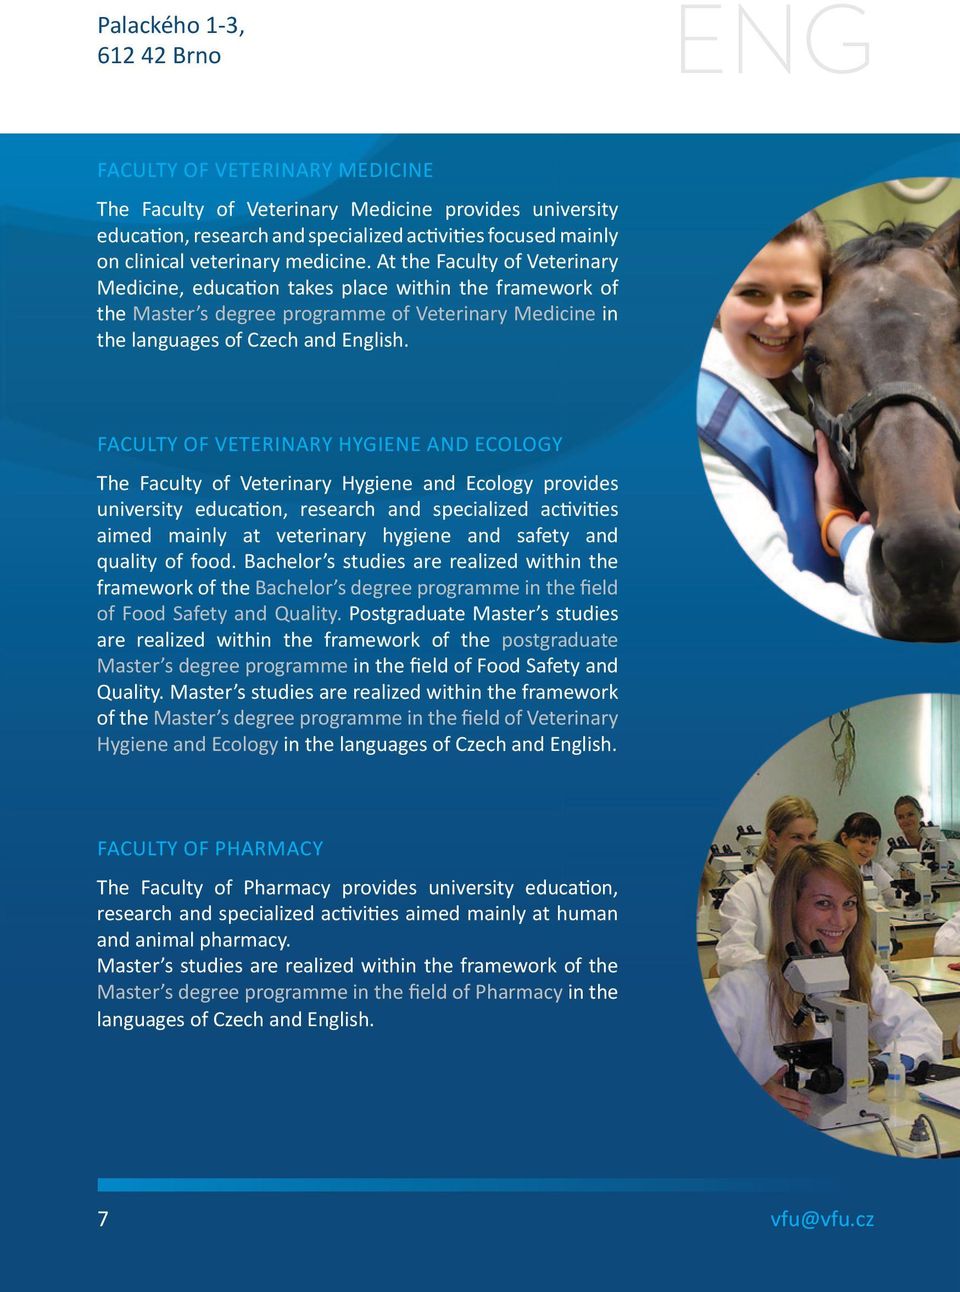 FACULTY OF VETERINARY HYGIENE AND ECOLOGY The Faculty of Veterinary Hygiene and Ecology provides university education, research and specialized activities aimed mainly at veterinary hygiene and